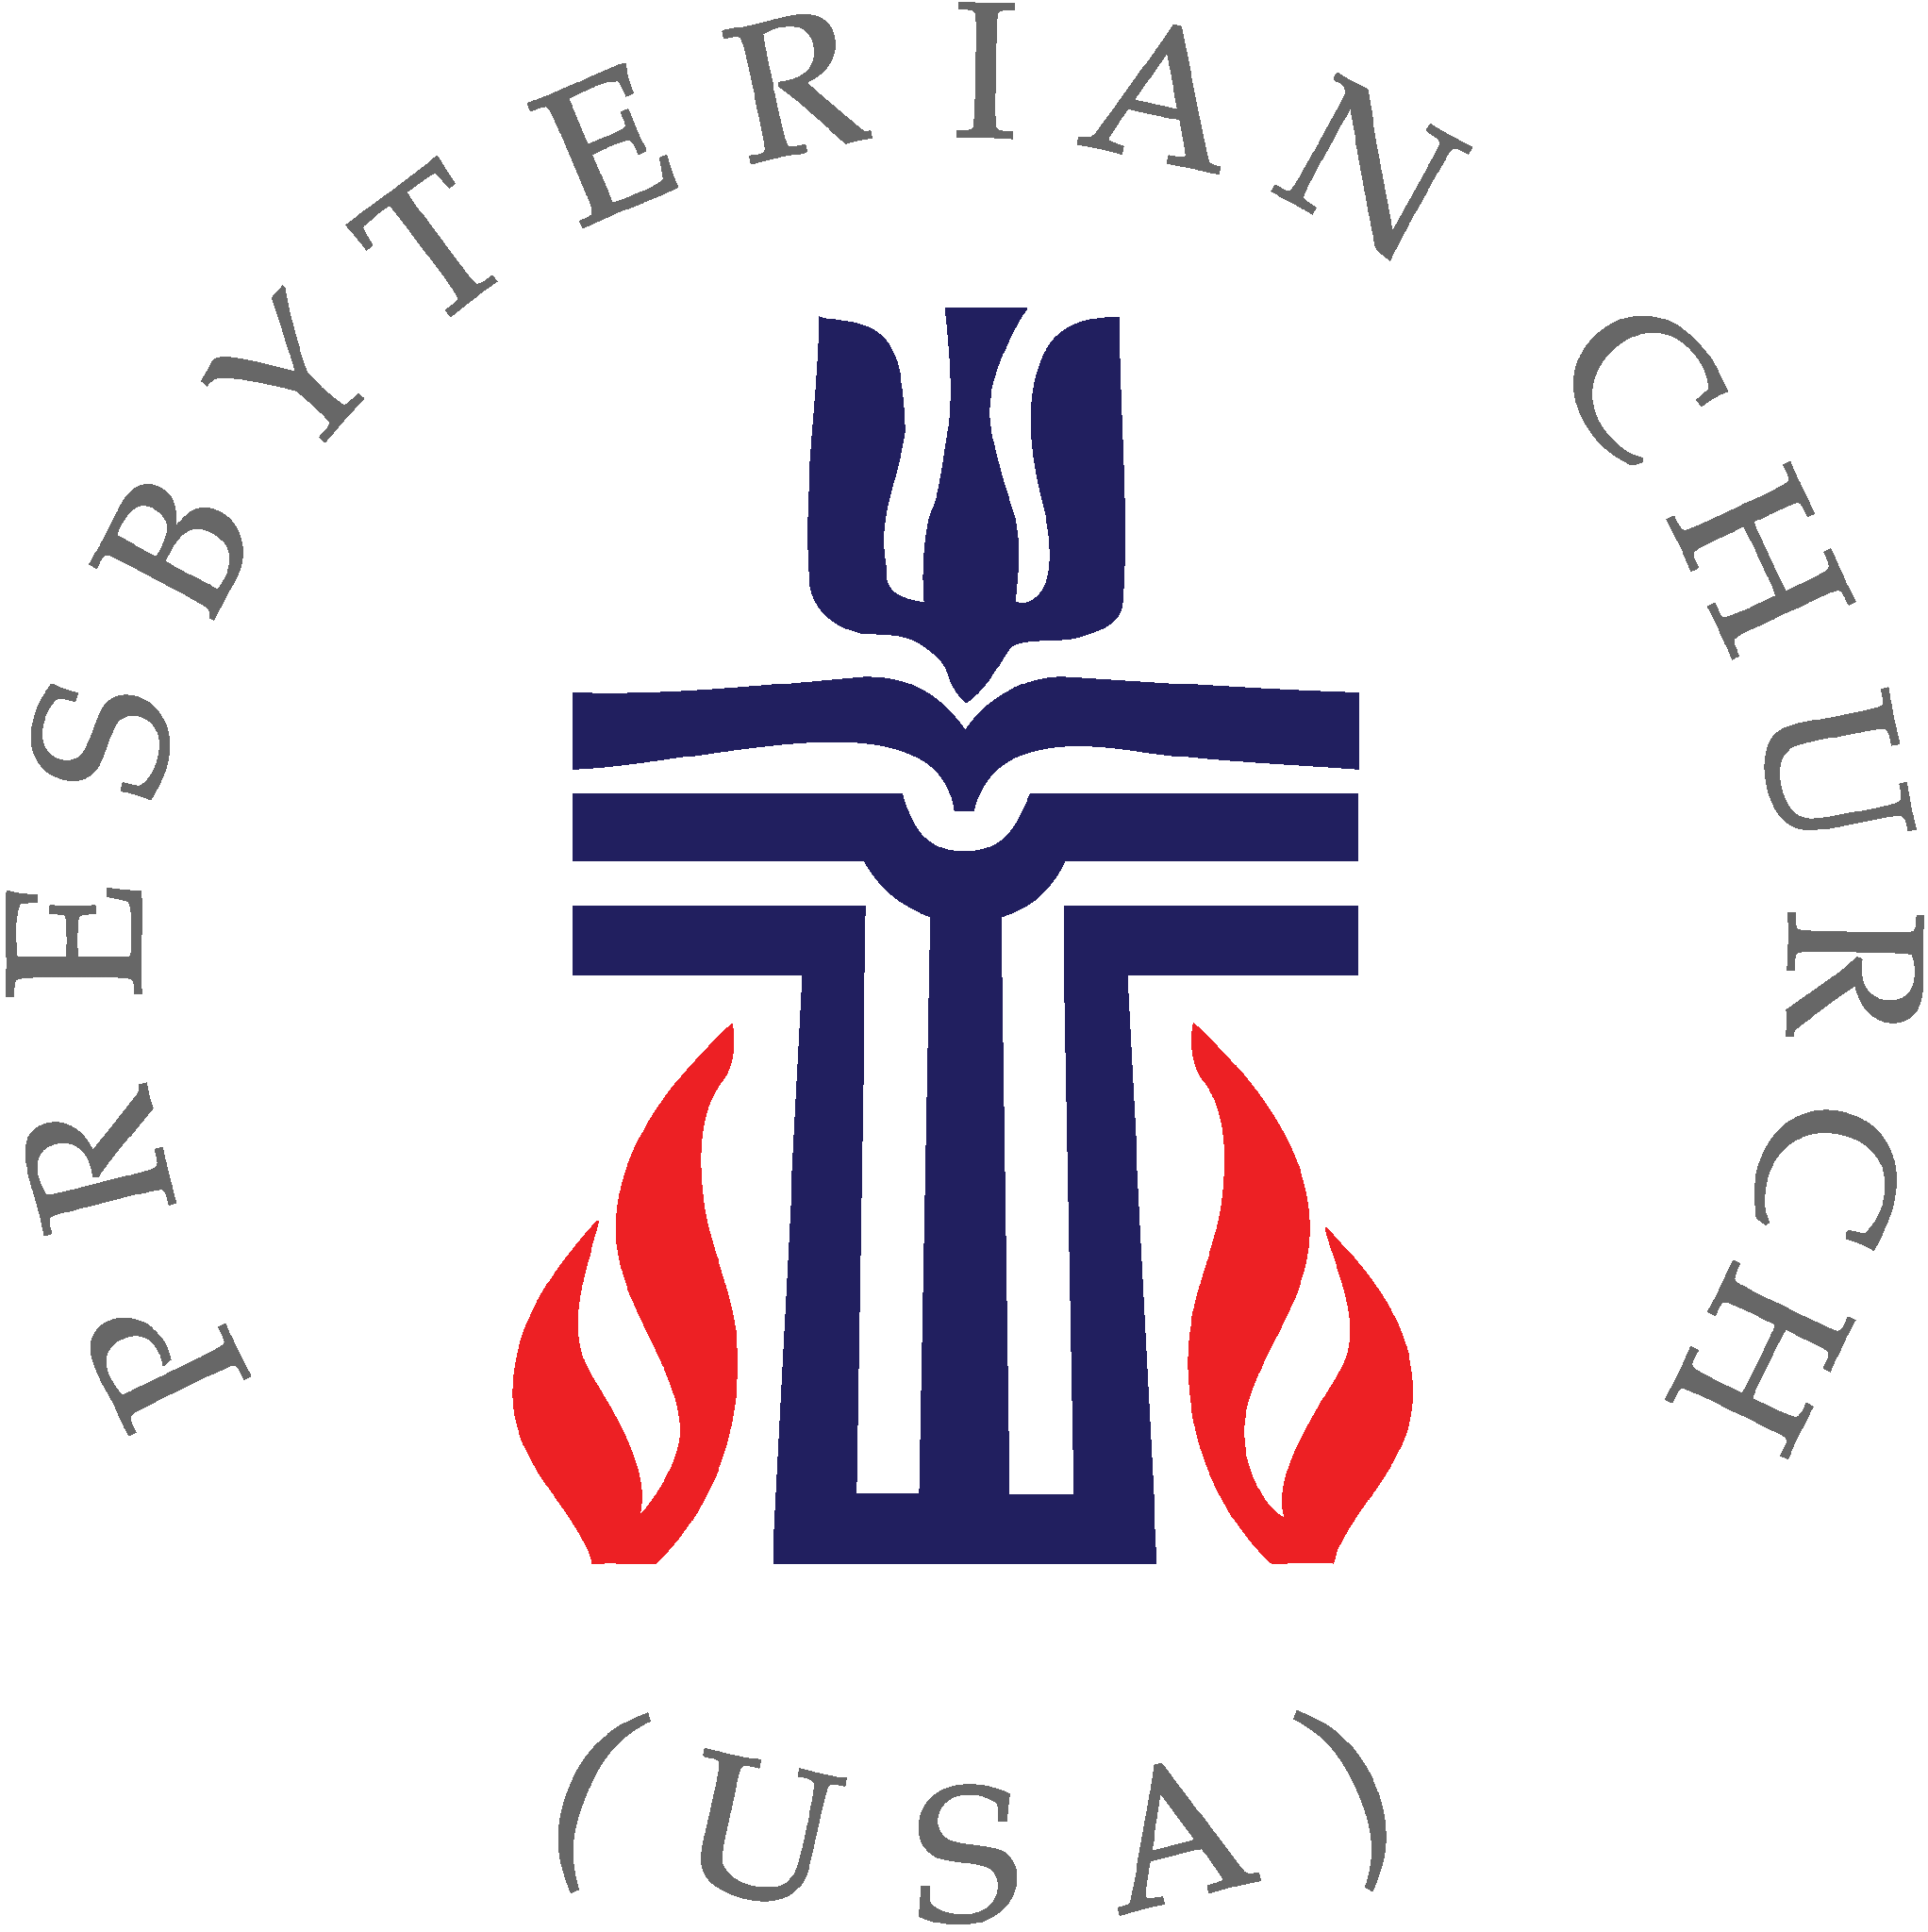 PCUSA partners in Syria plead for peace Juicy Ecumenism